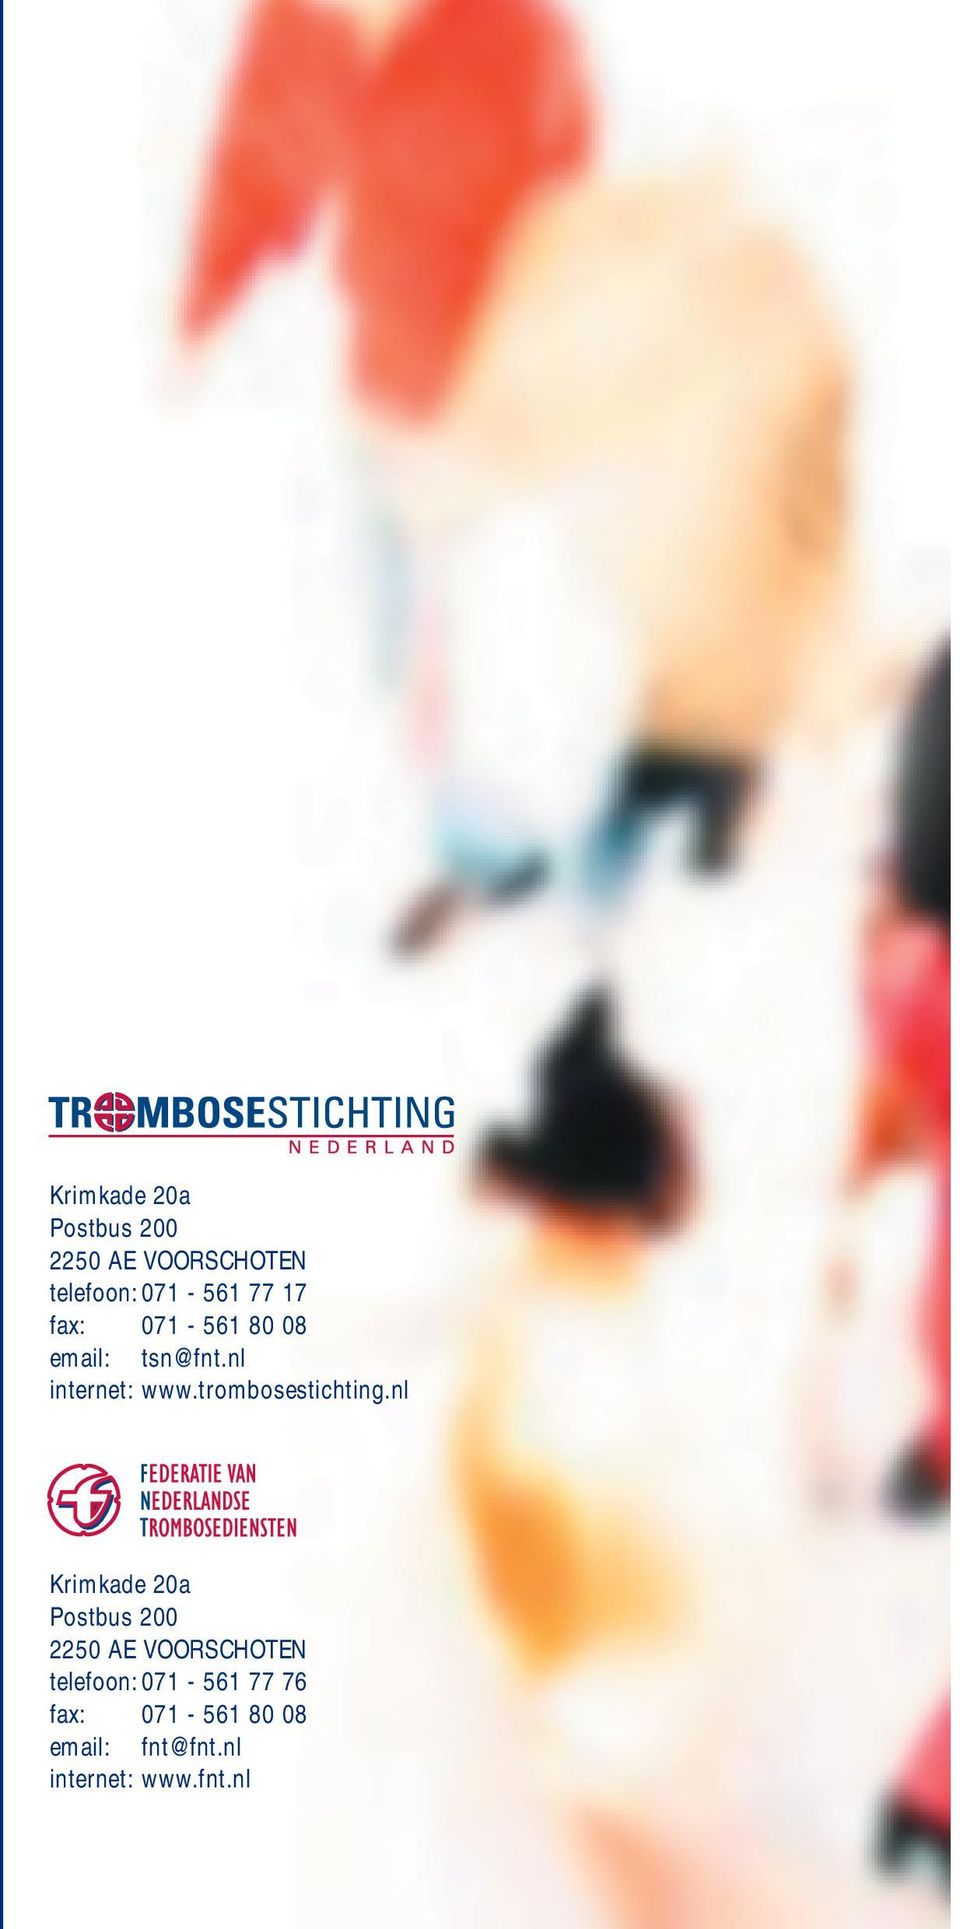 trombosestichting.nl  76 fax: 071-561 80 08 email: fnt@fnt.